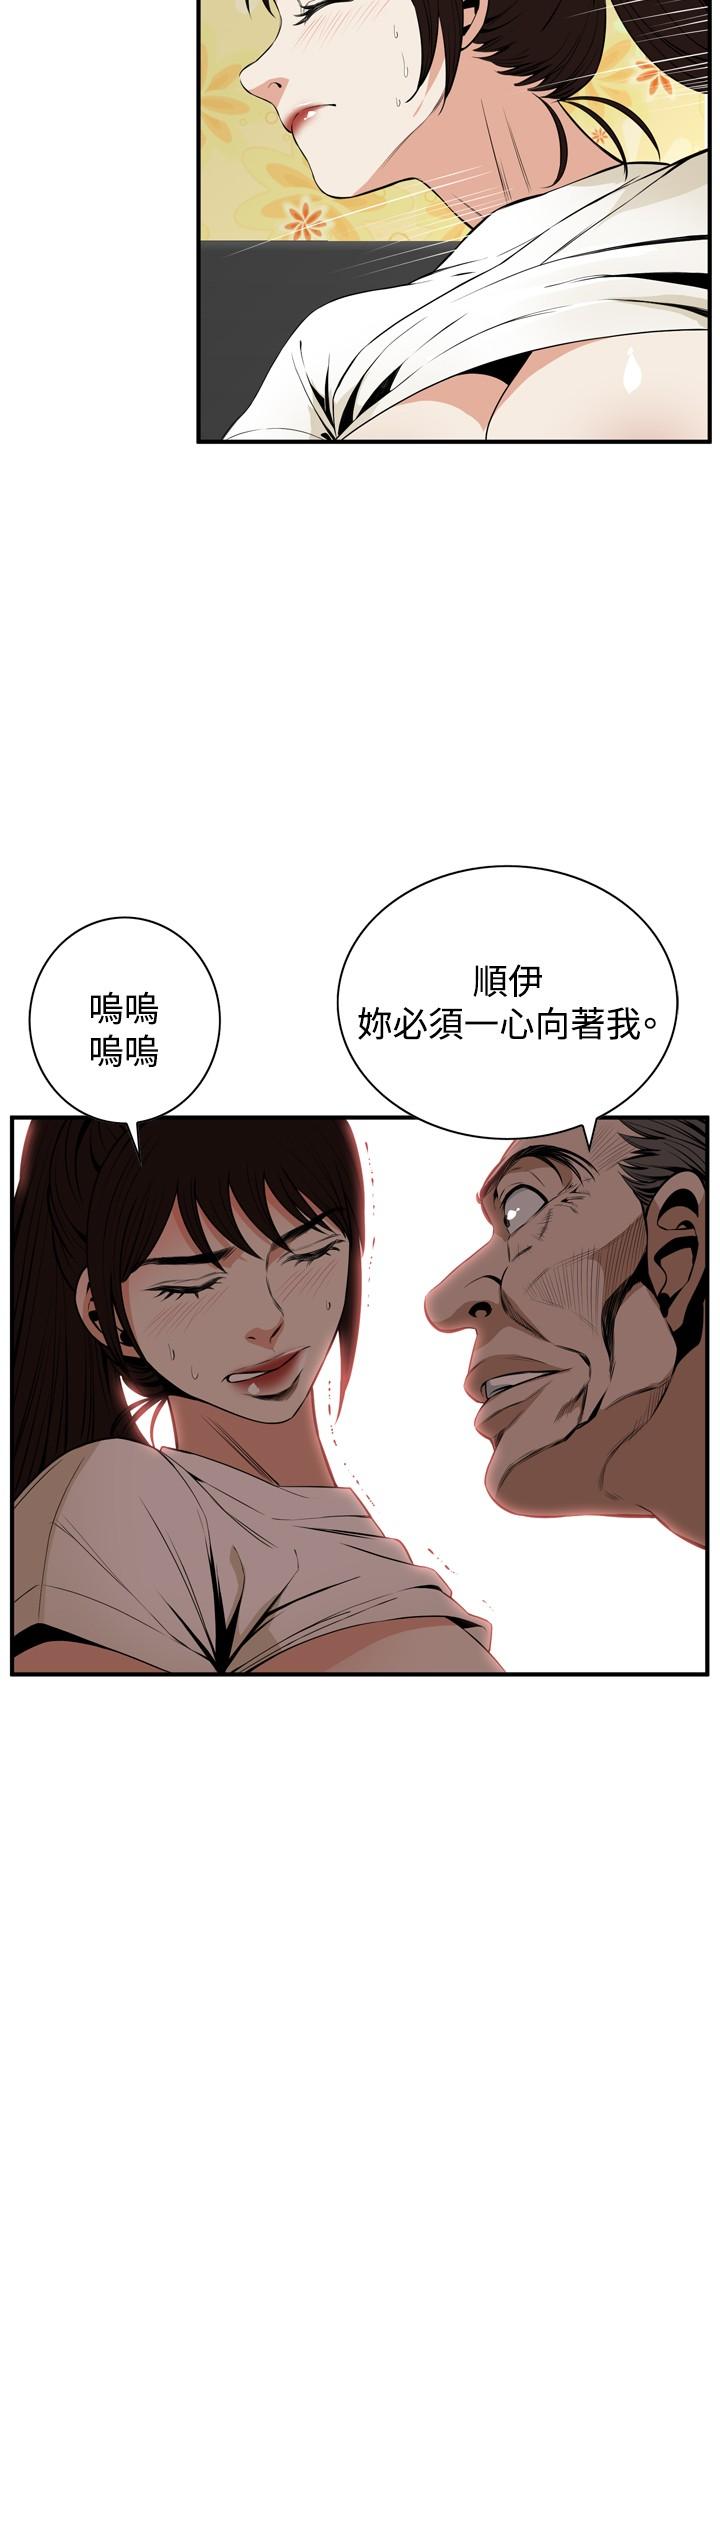 Pica Take a Peek 偷窥 Ch.39~58 [Chinese]中文 Transsexual - Page 10